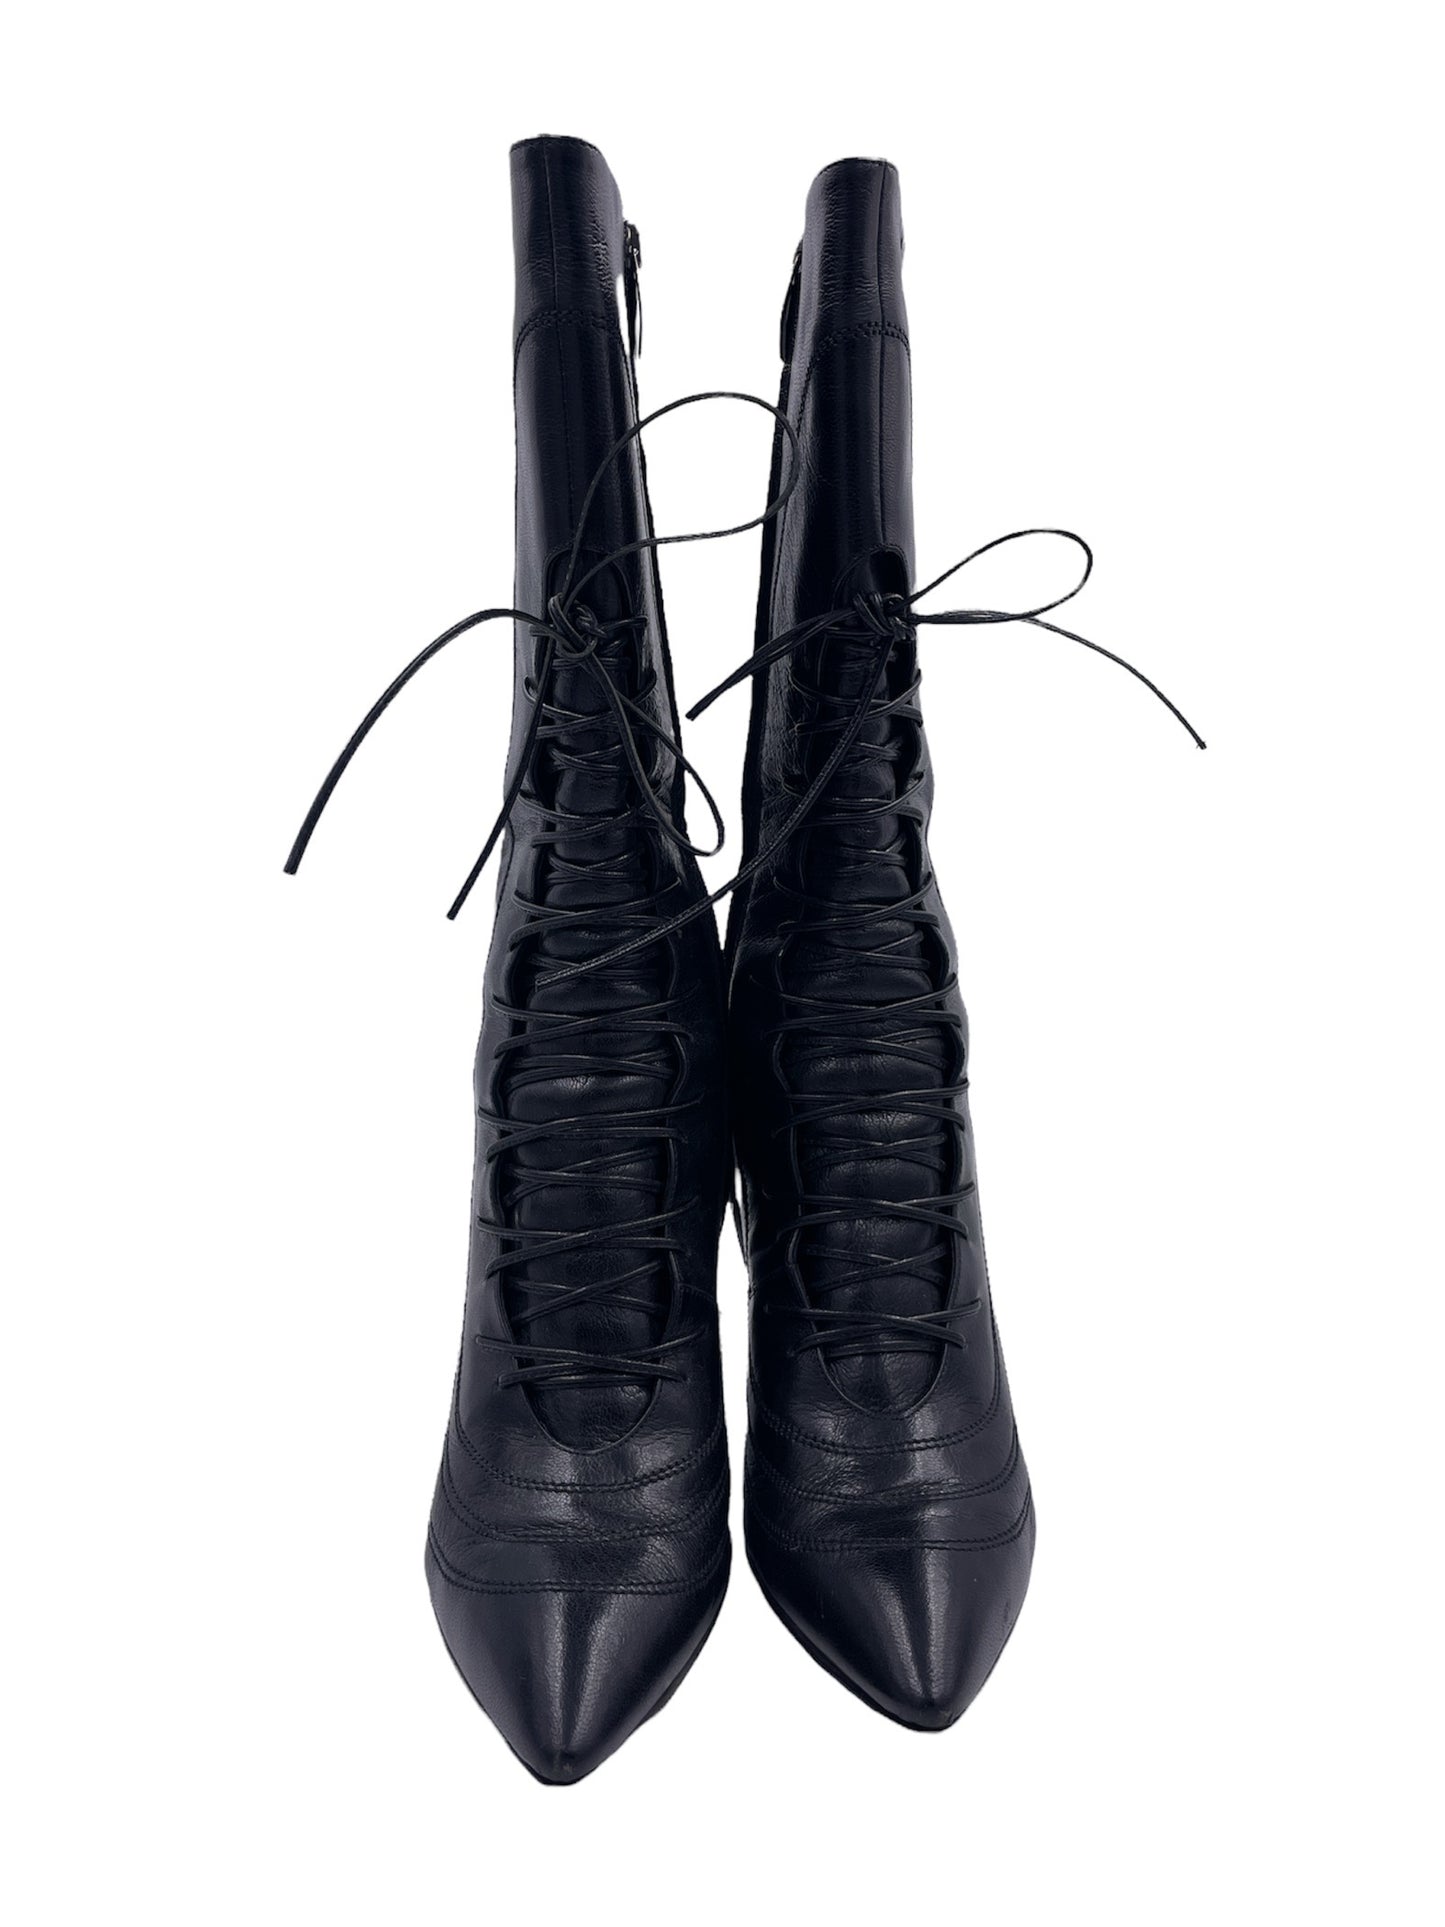 Sergio Rossi Leather Lace Up Heel Boots